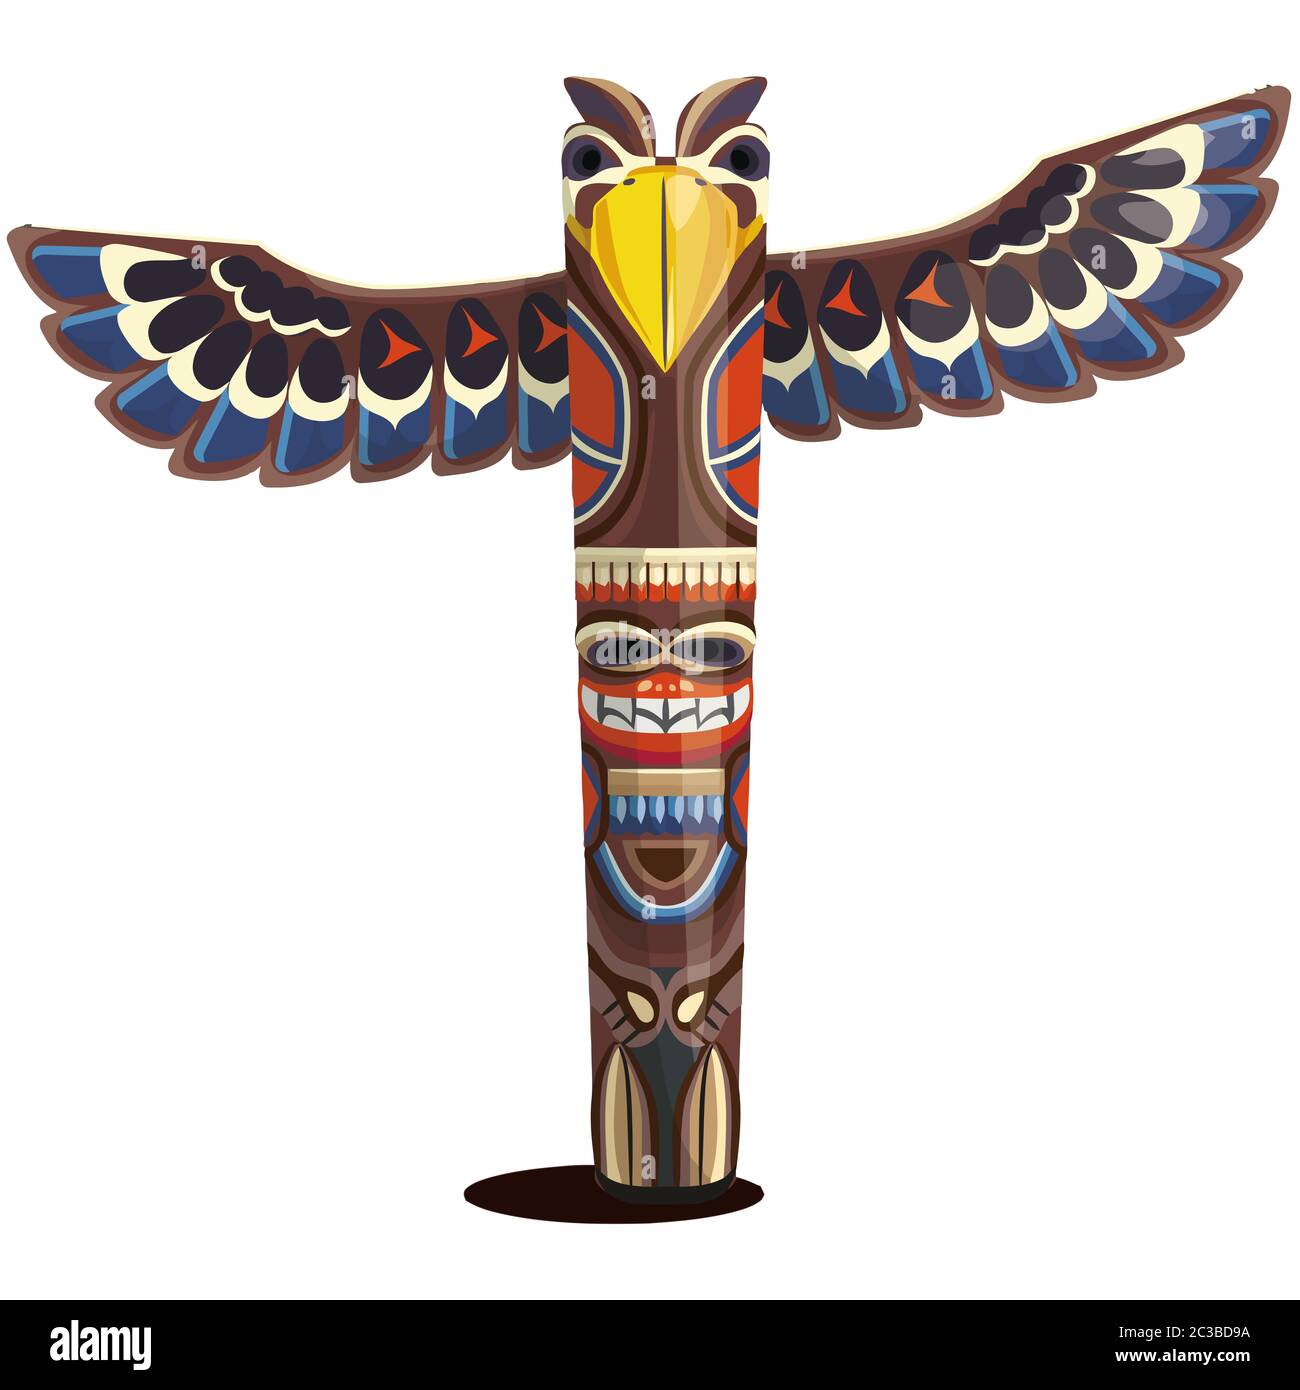 Eagle totem Cut Out Stock Images & Pictures - Alamy